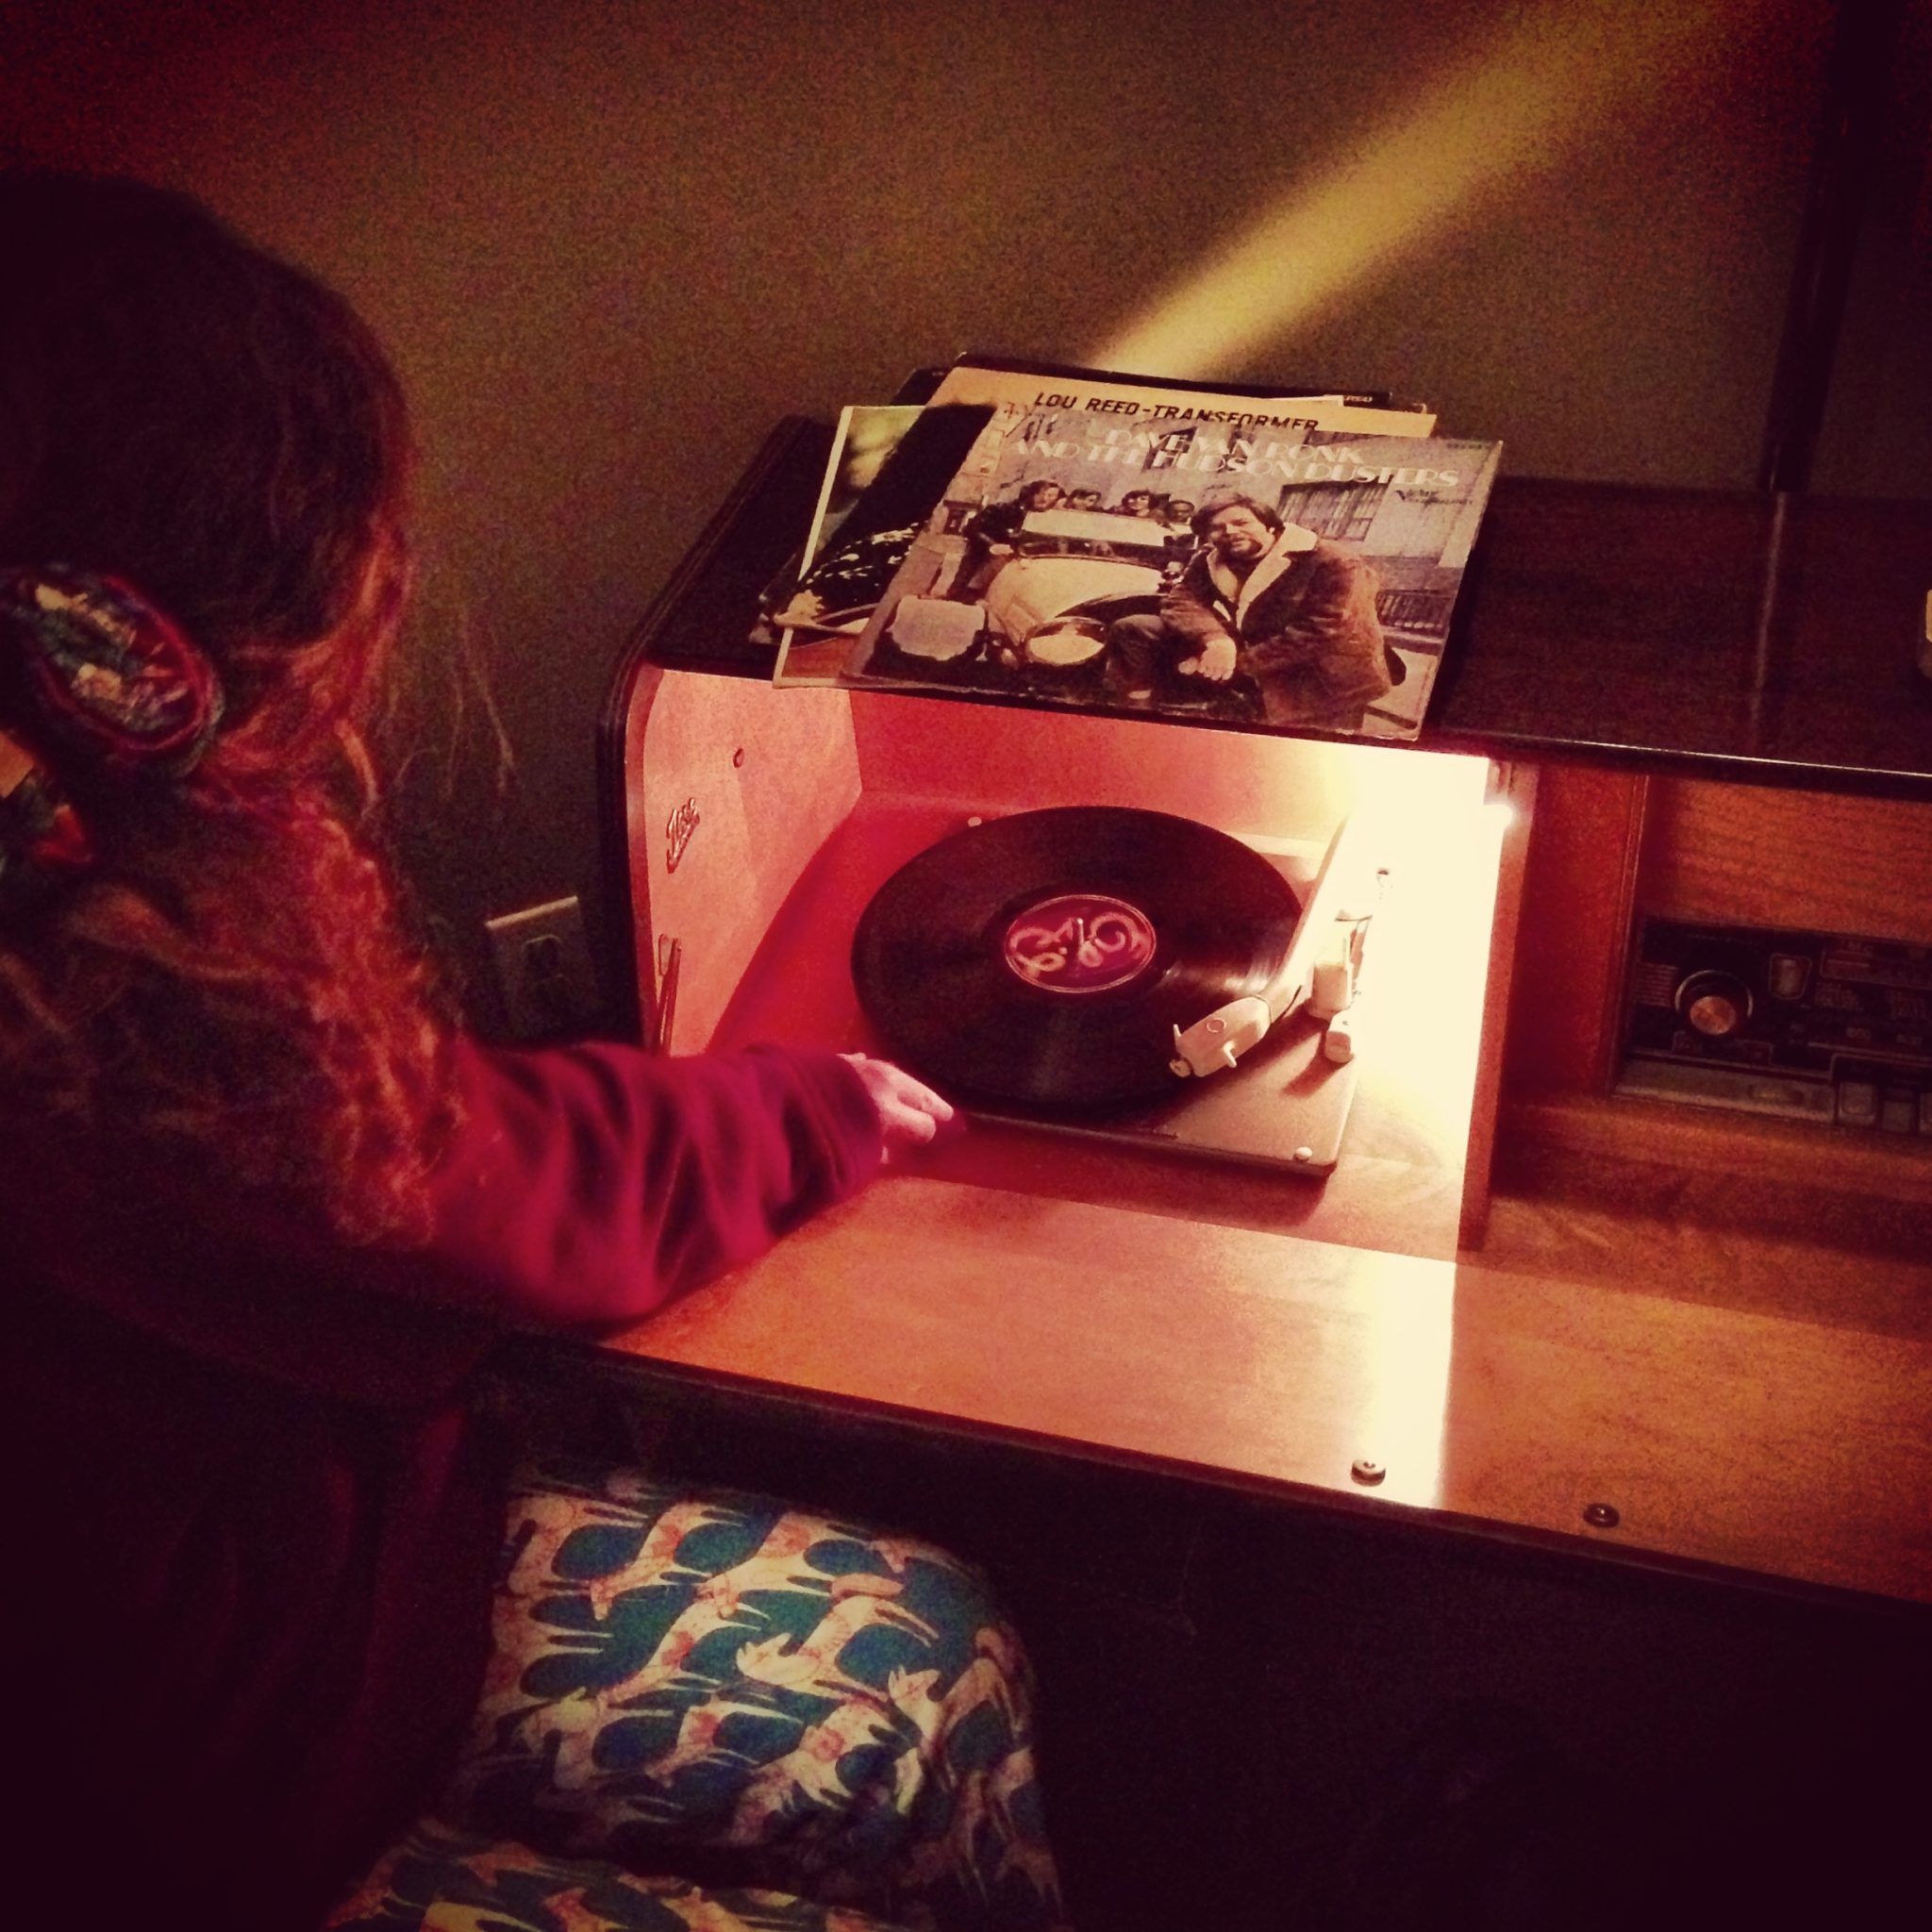 Carissa spinning tunes on the old record player